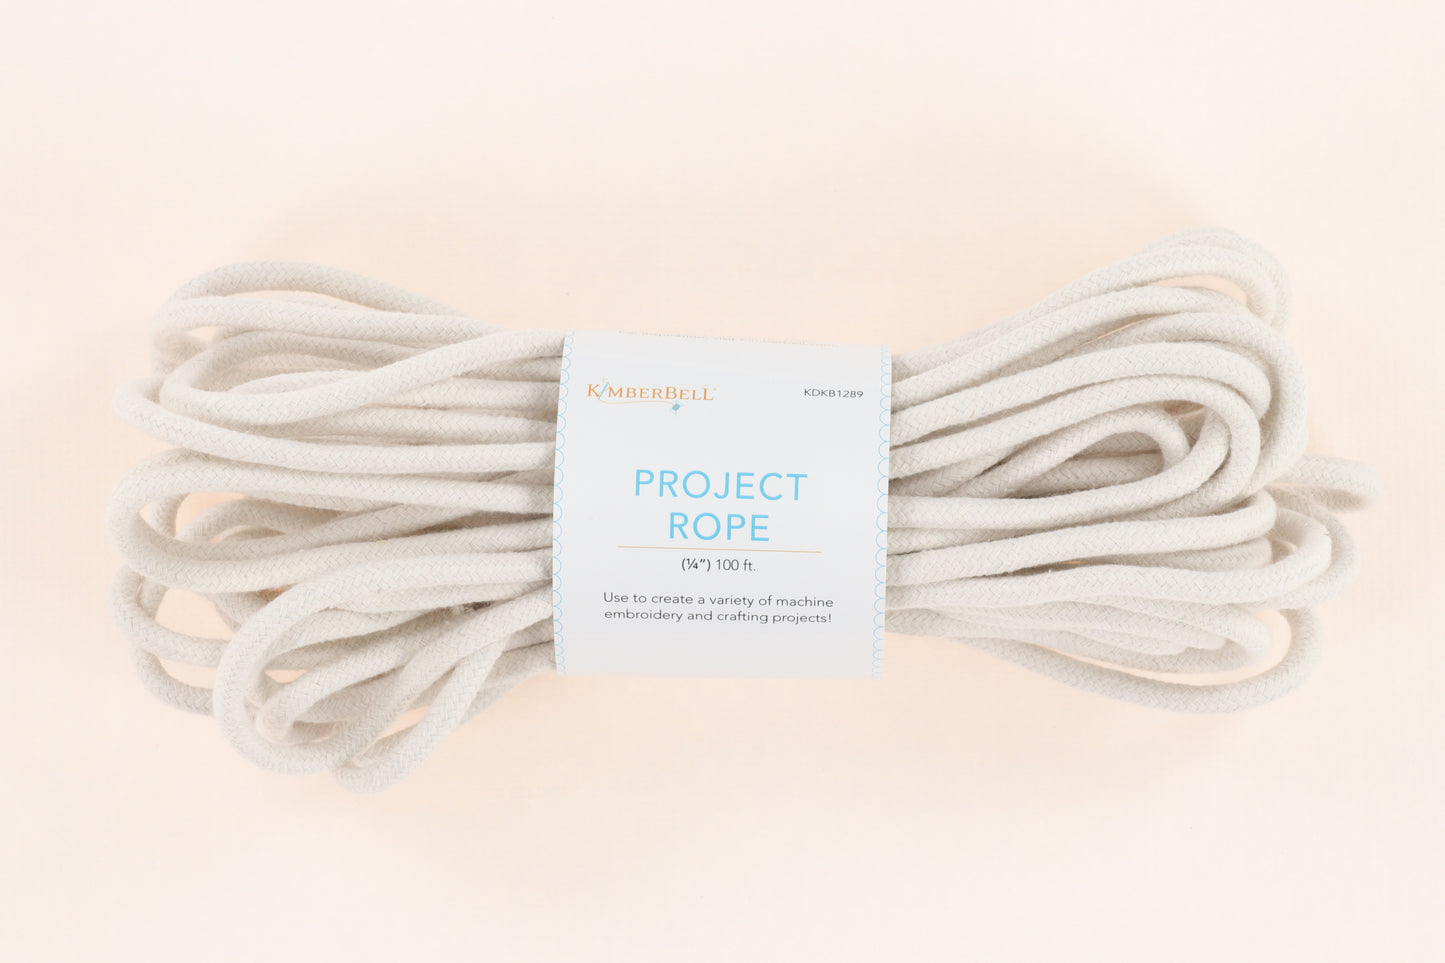 Project Rope - 100ft - KDKB1289